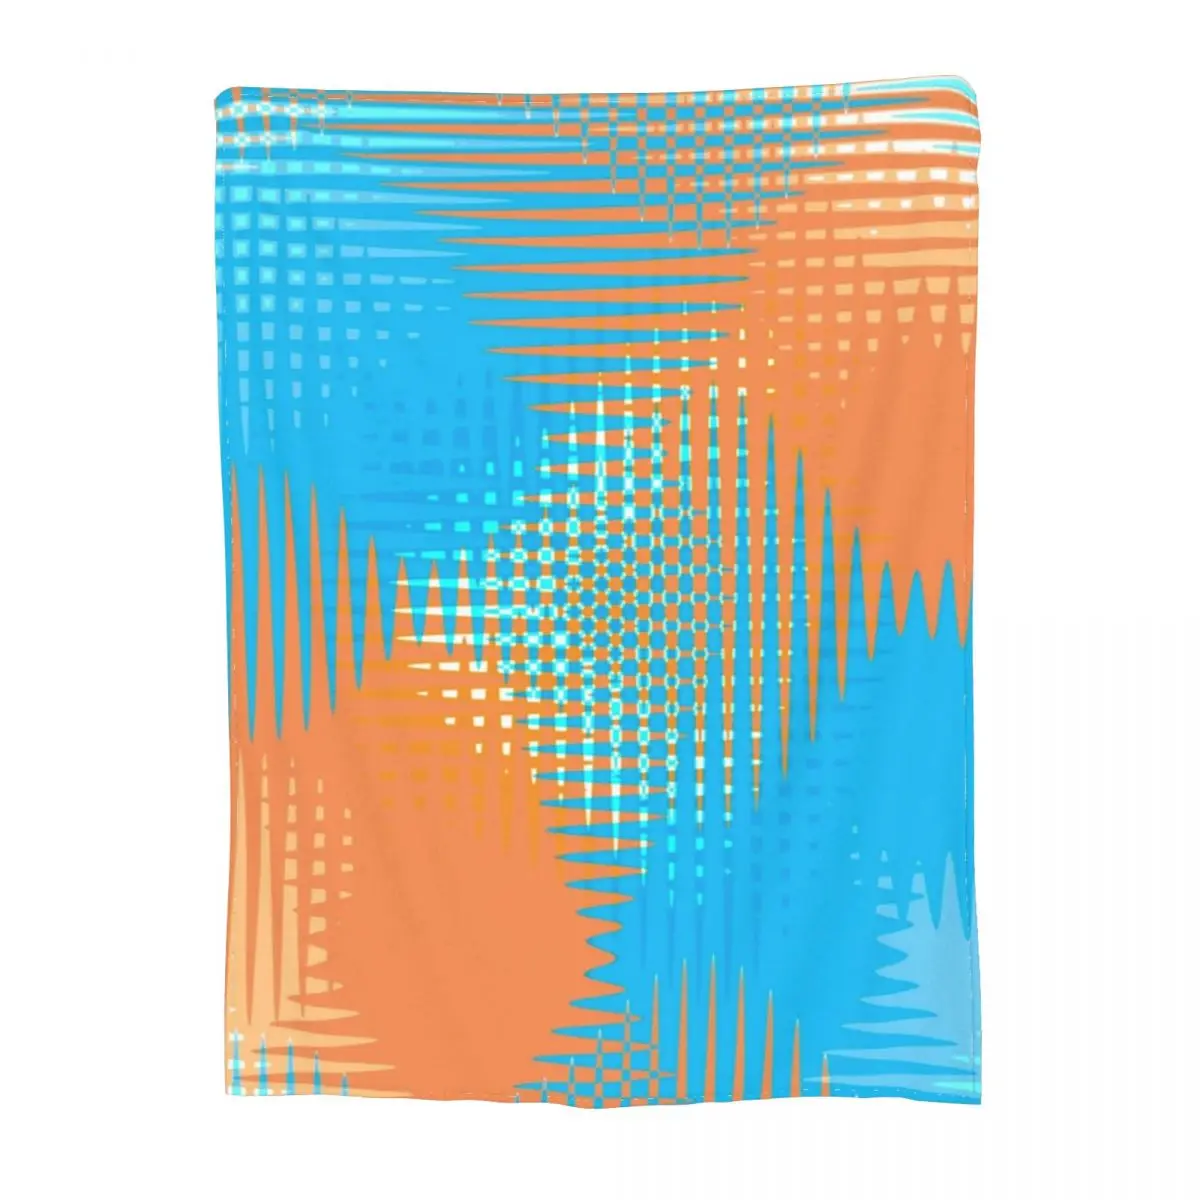 Abstract Two Tone Blanket Stylized Orange and Sky Blue Cheap Cozy Bedspread Fleece For Photo Shoot Super Soft Blanket